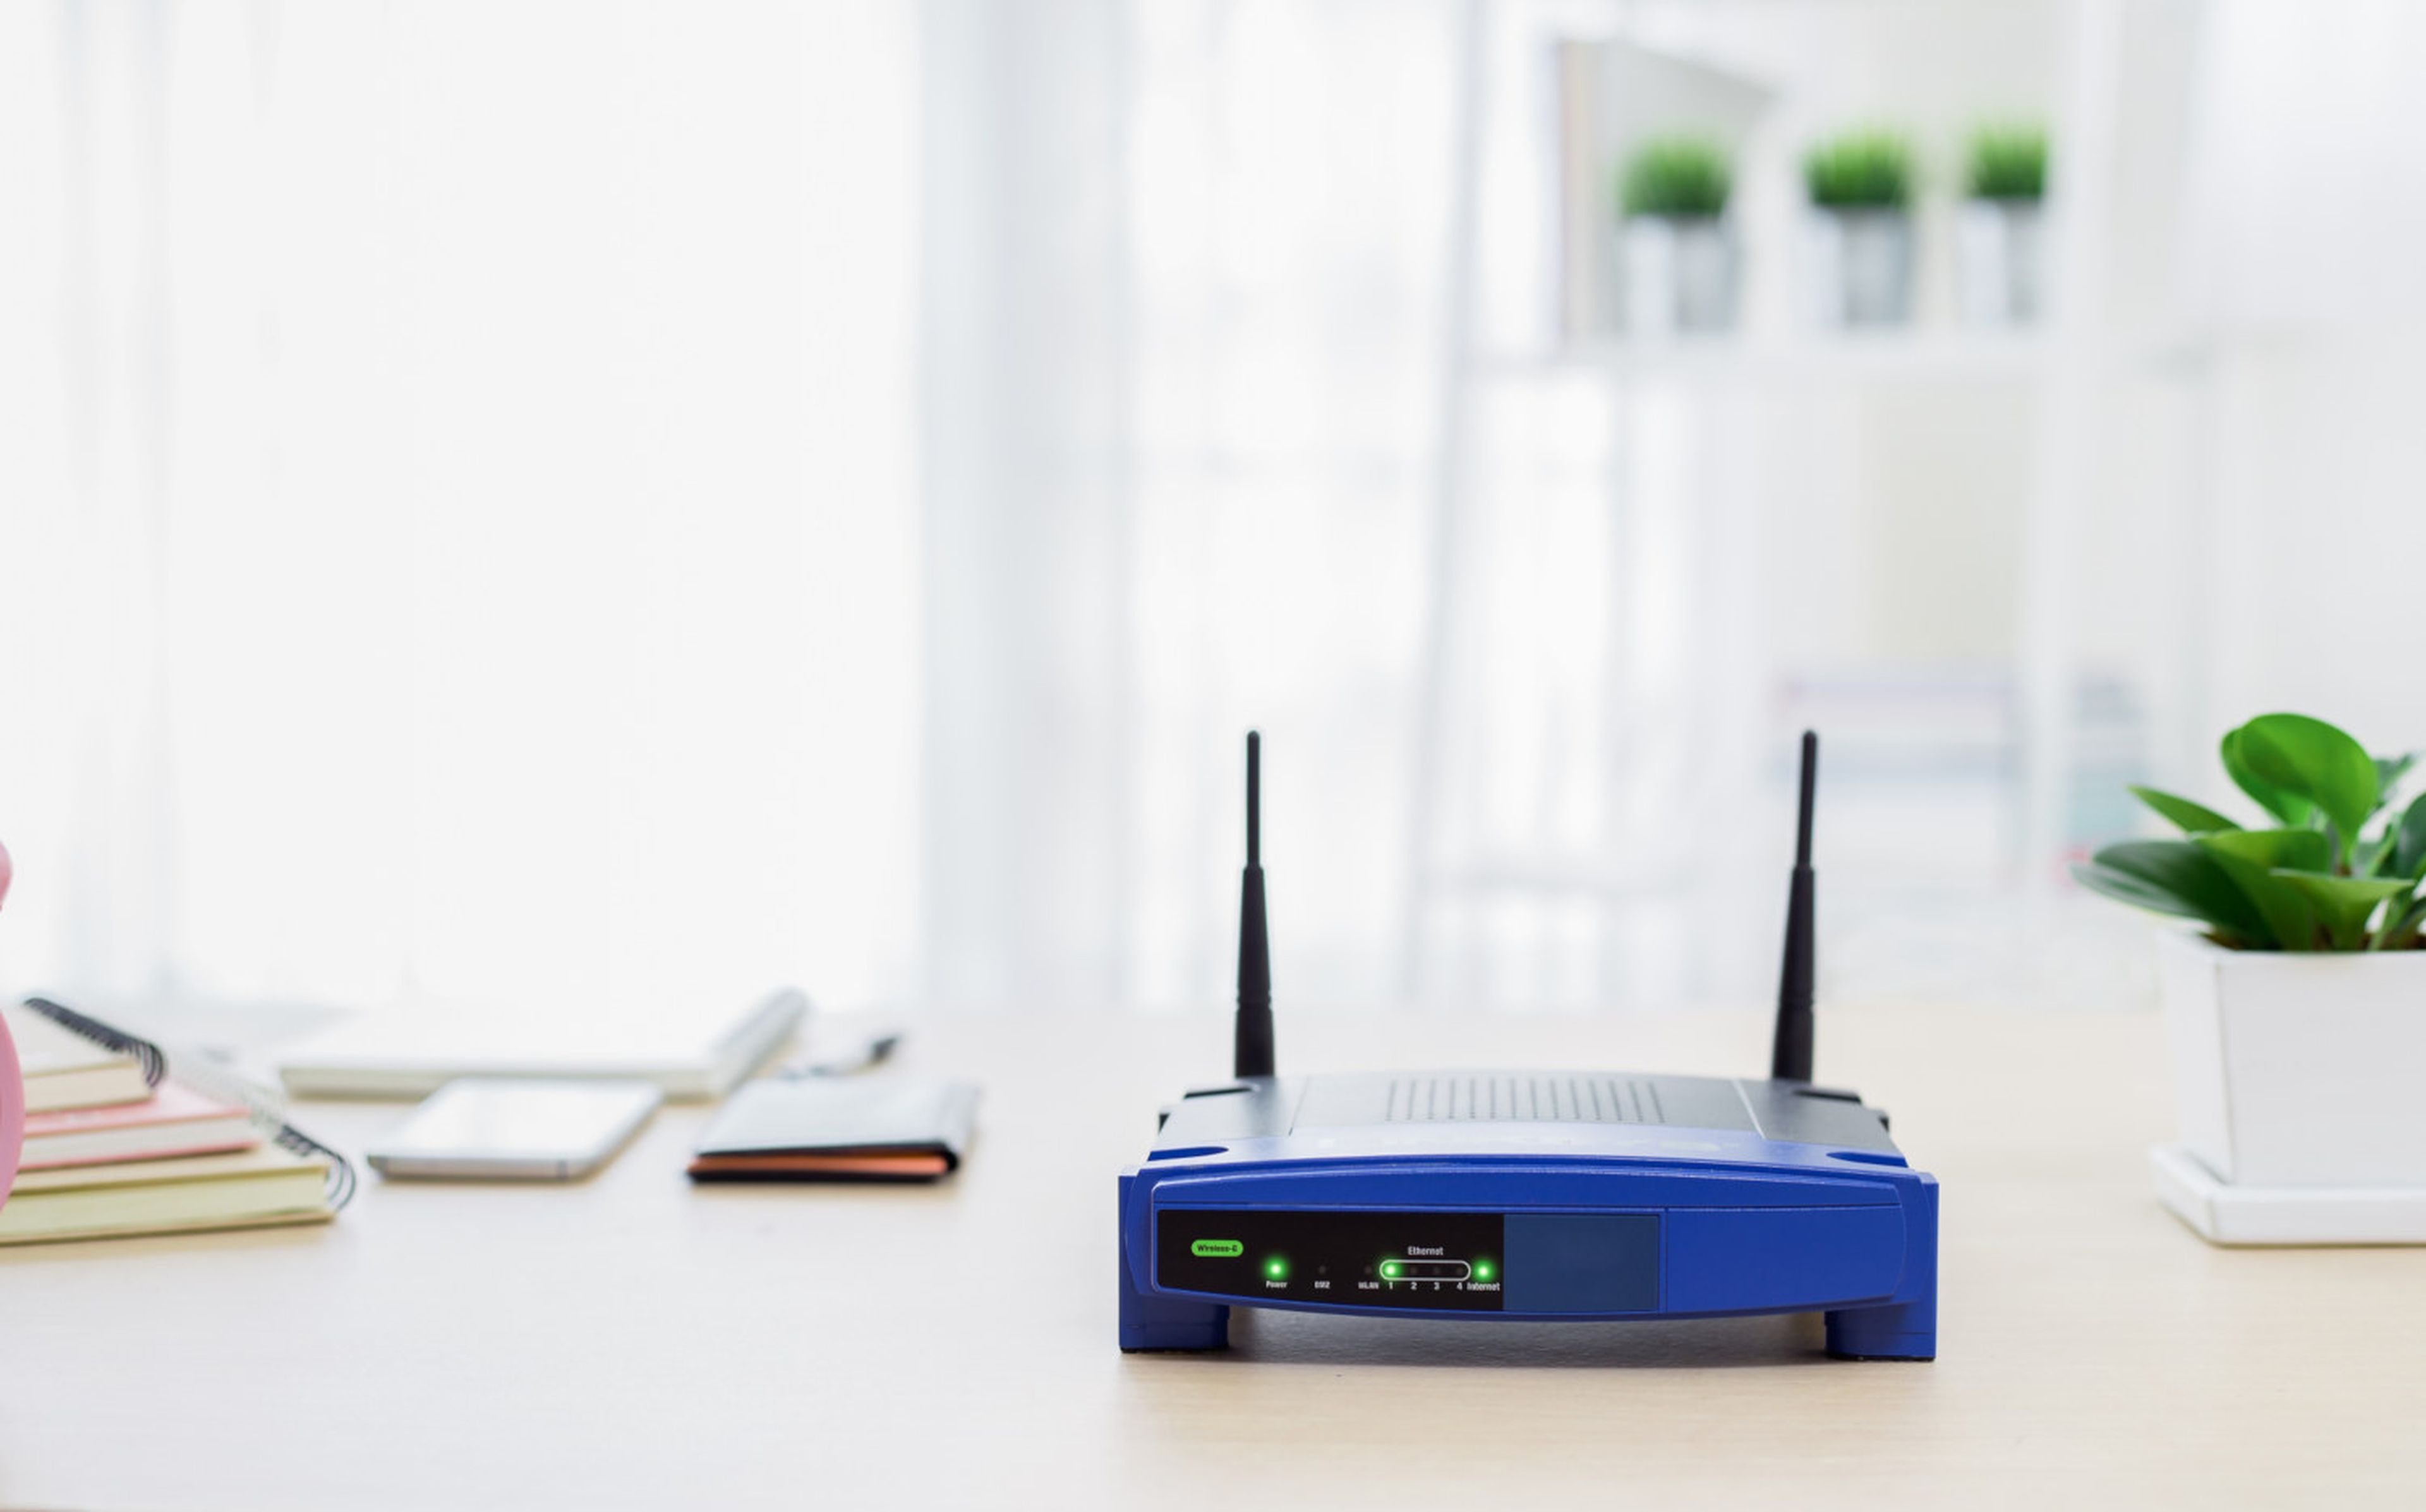 Router WiFi